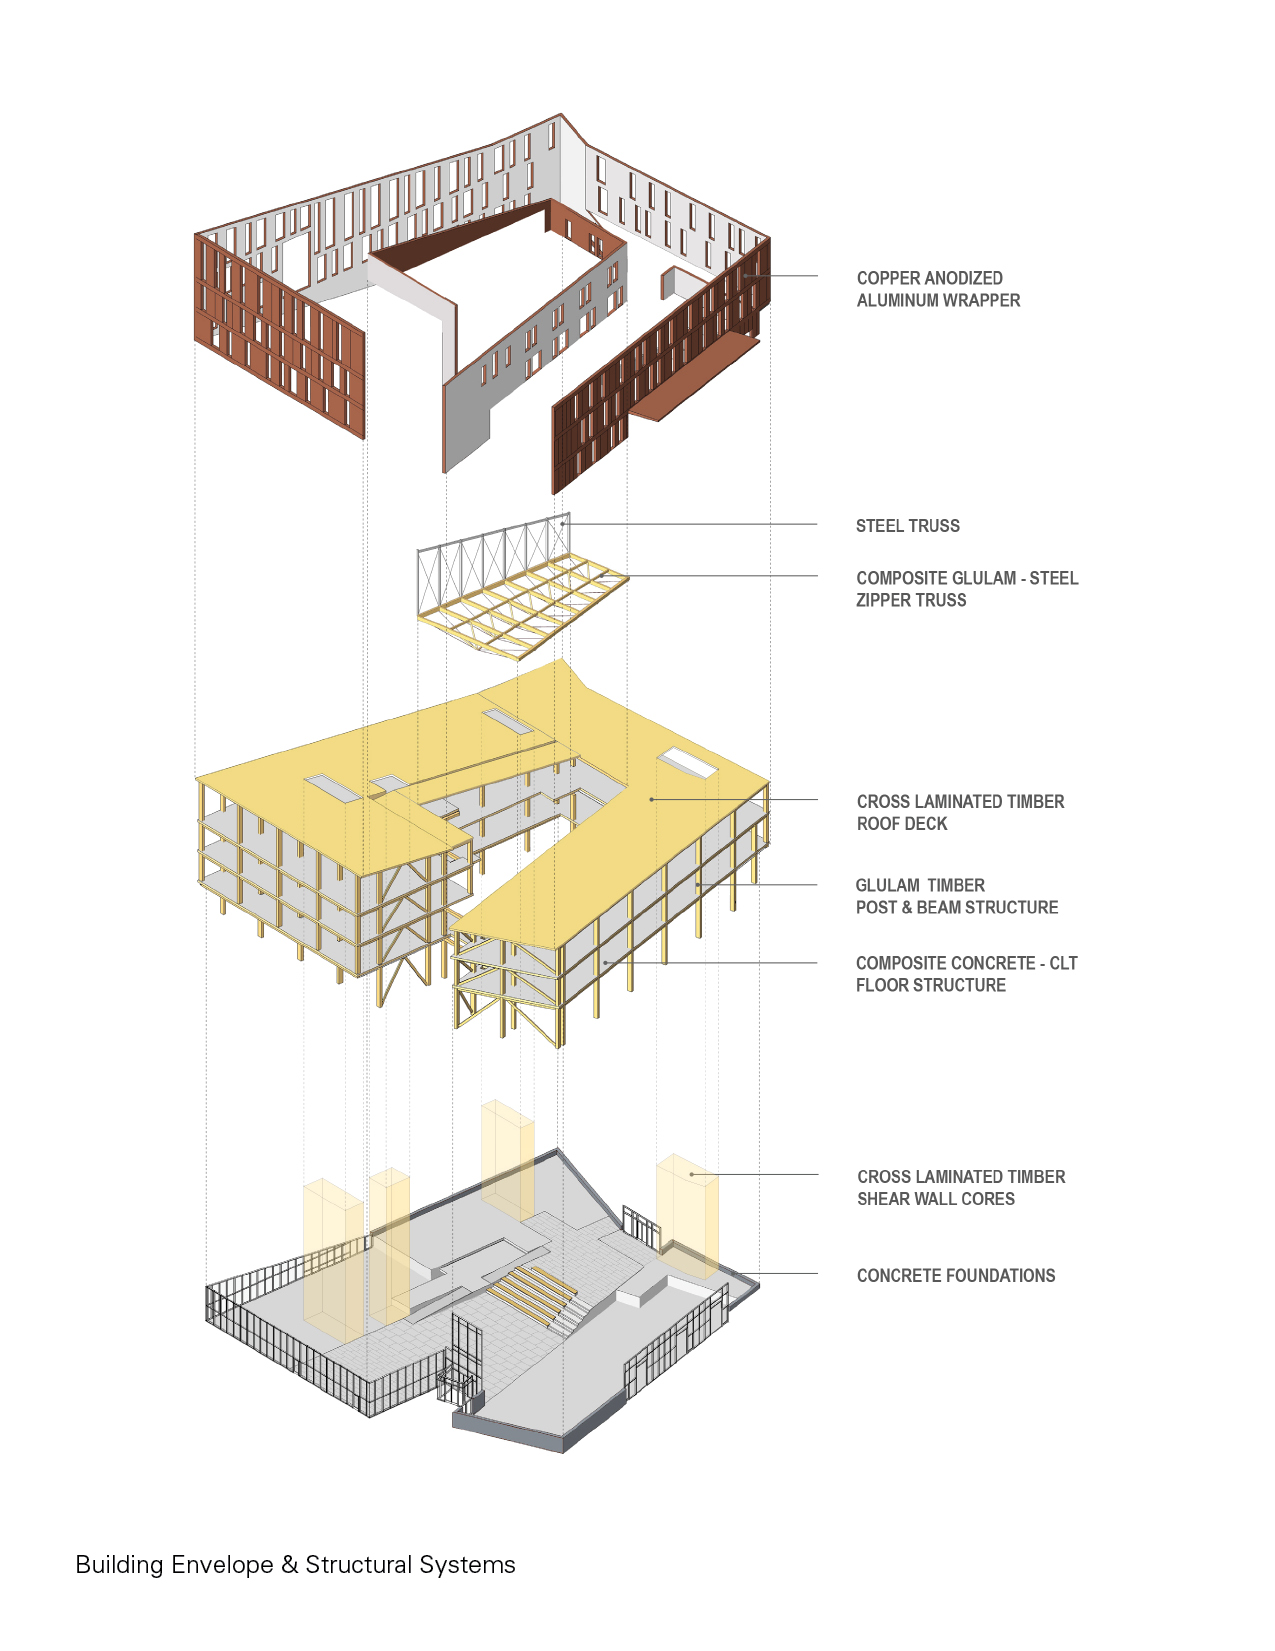 Diagram of the project's structural and envelope systems